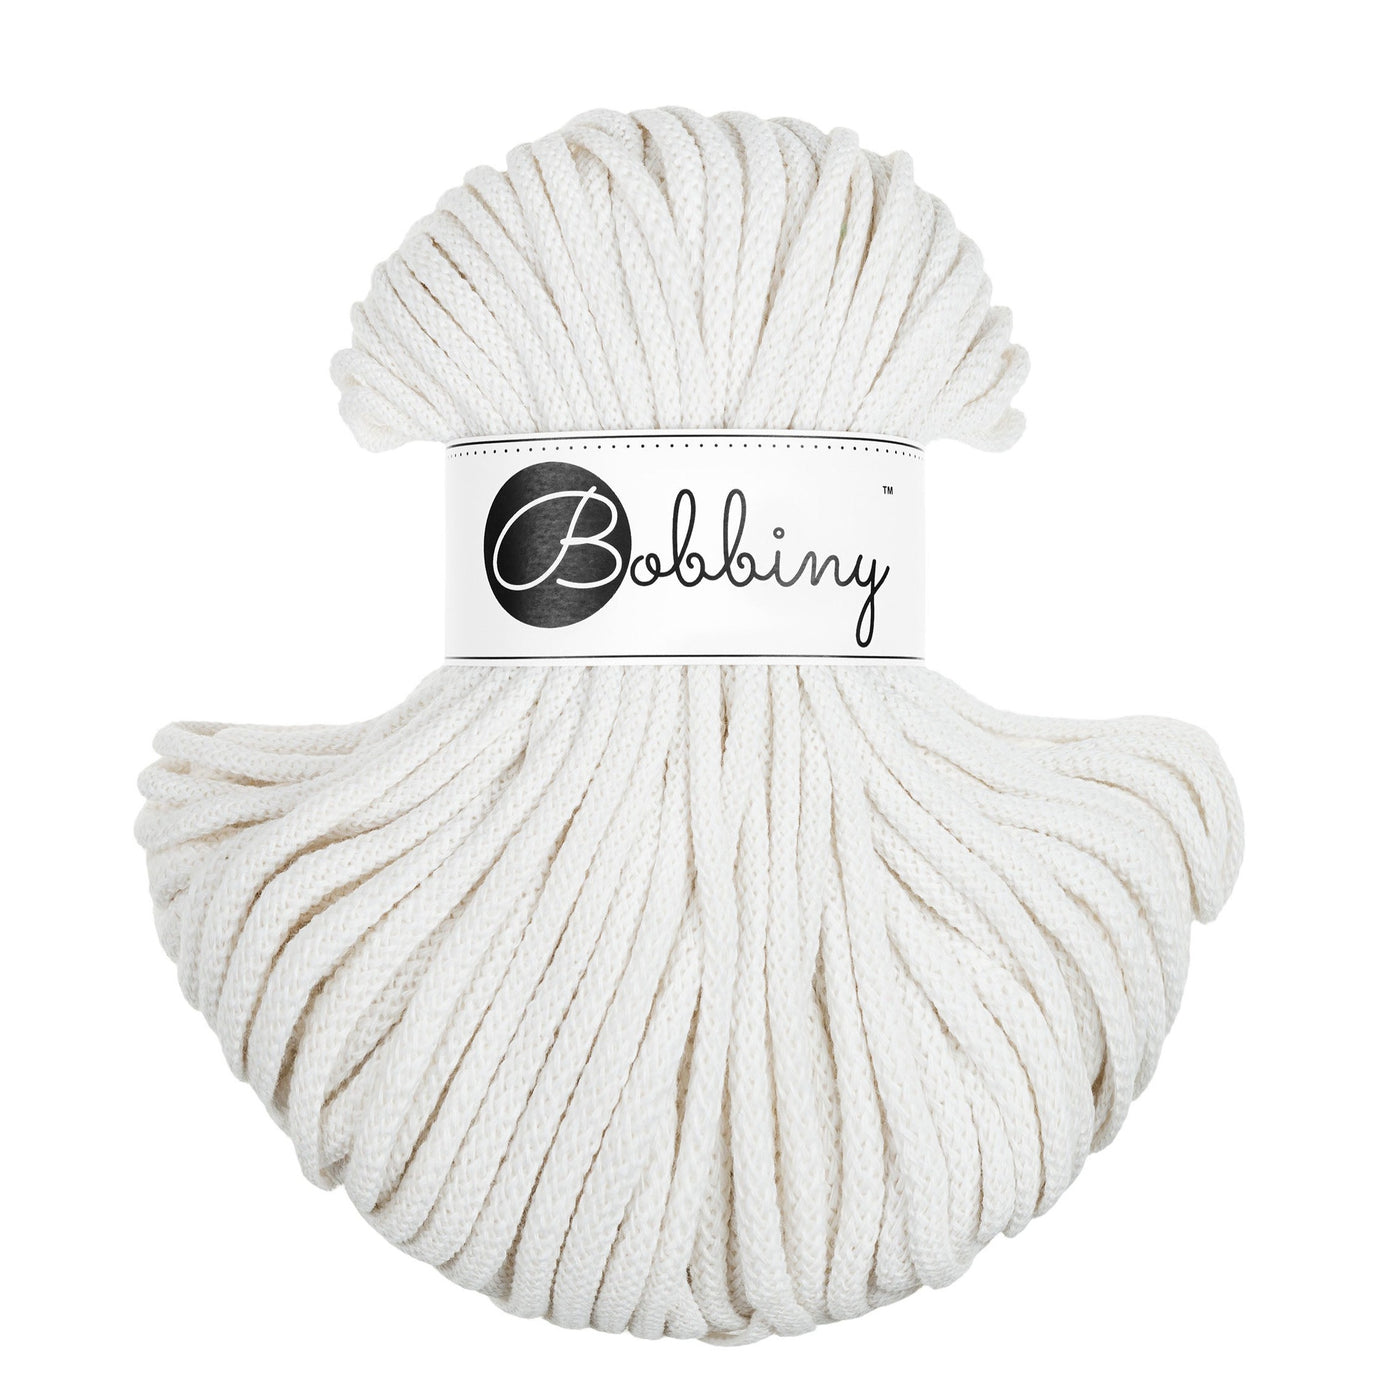 Bobbiny braided cord 5mm 50m in off white shade